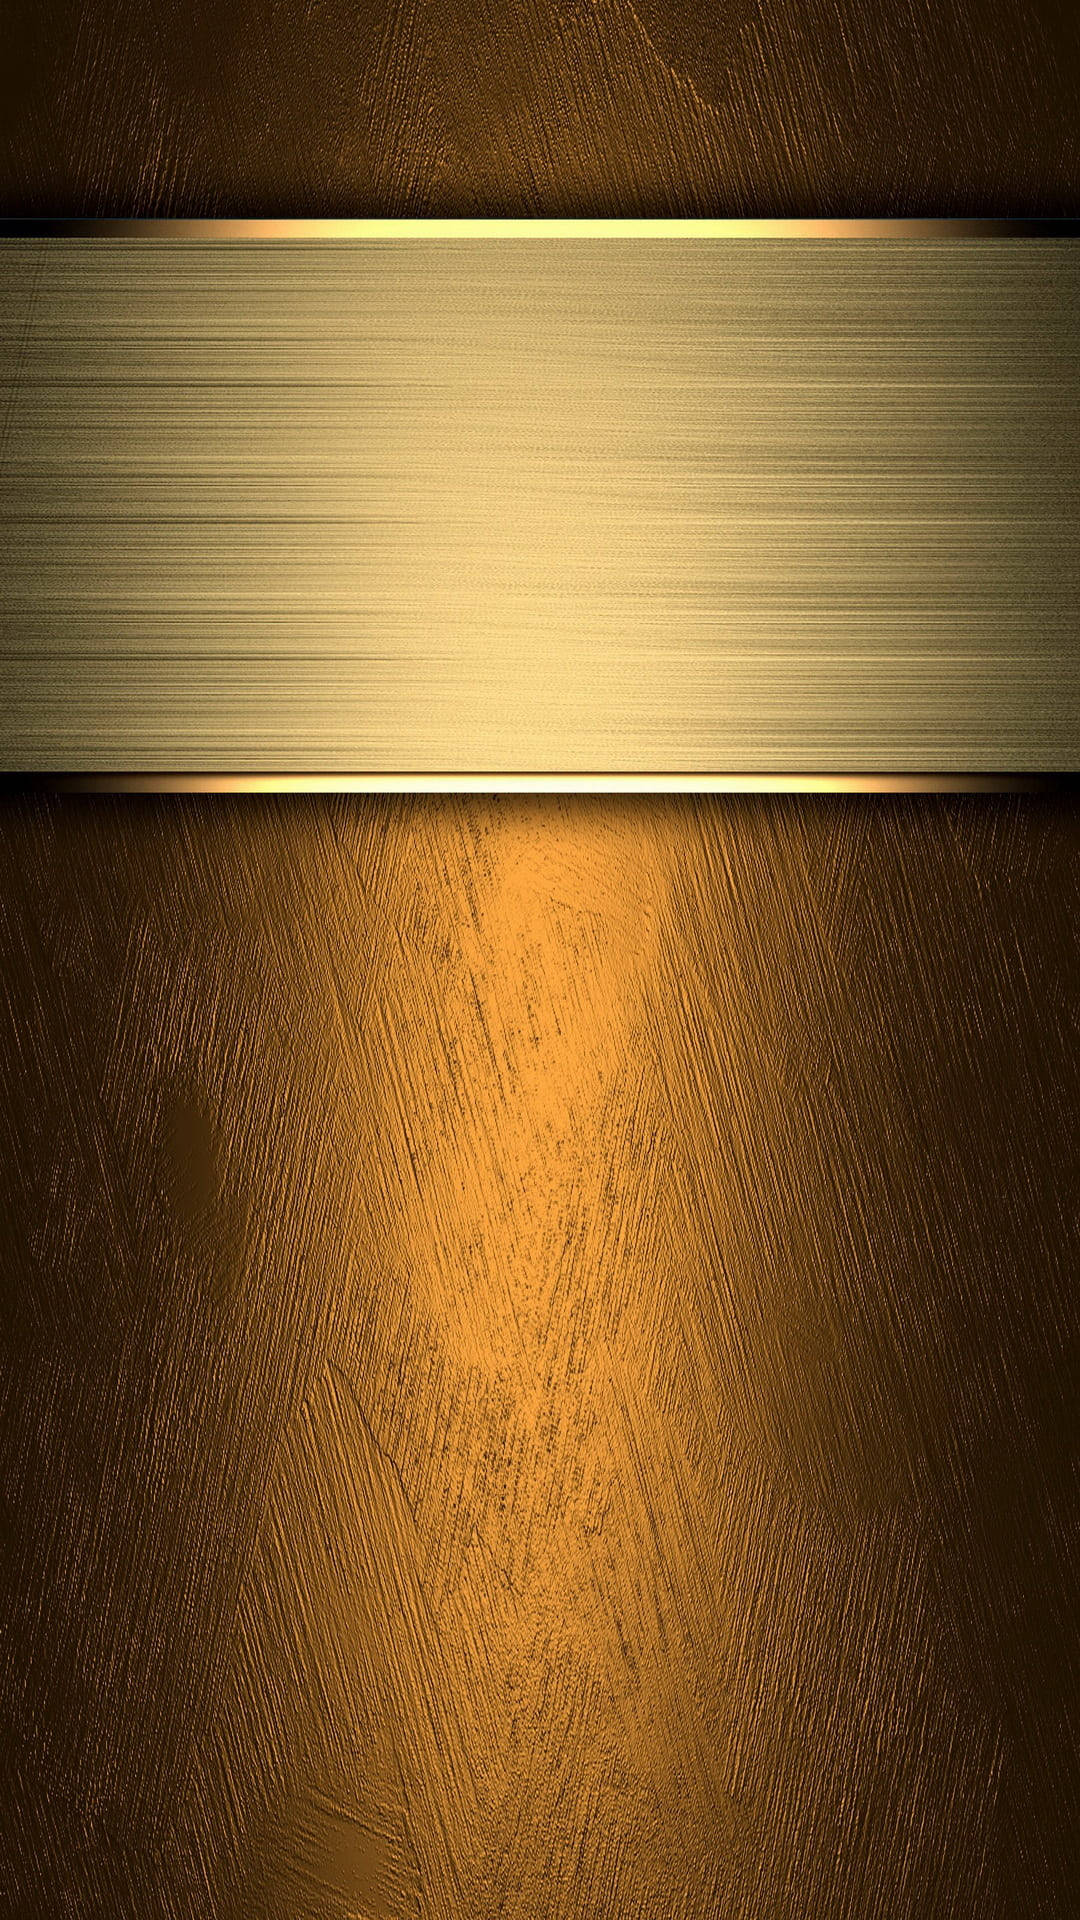 Iphone 12 Pro Max Gold Textures Background